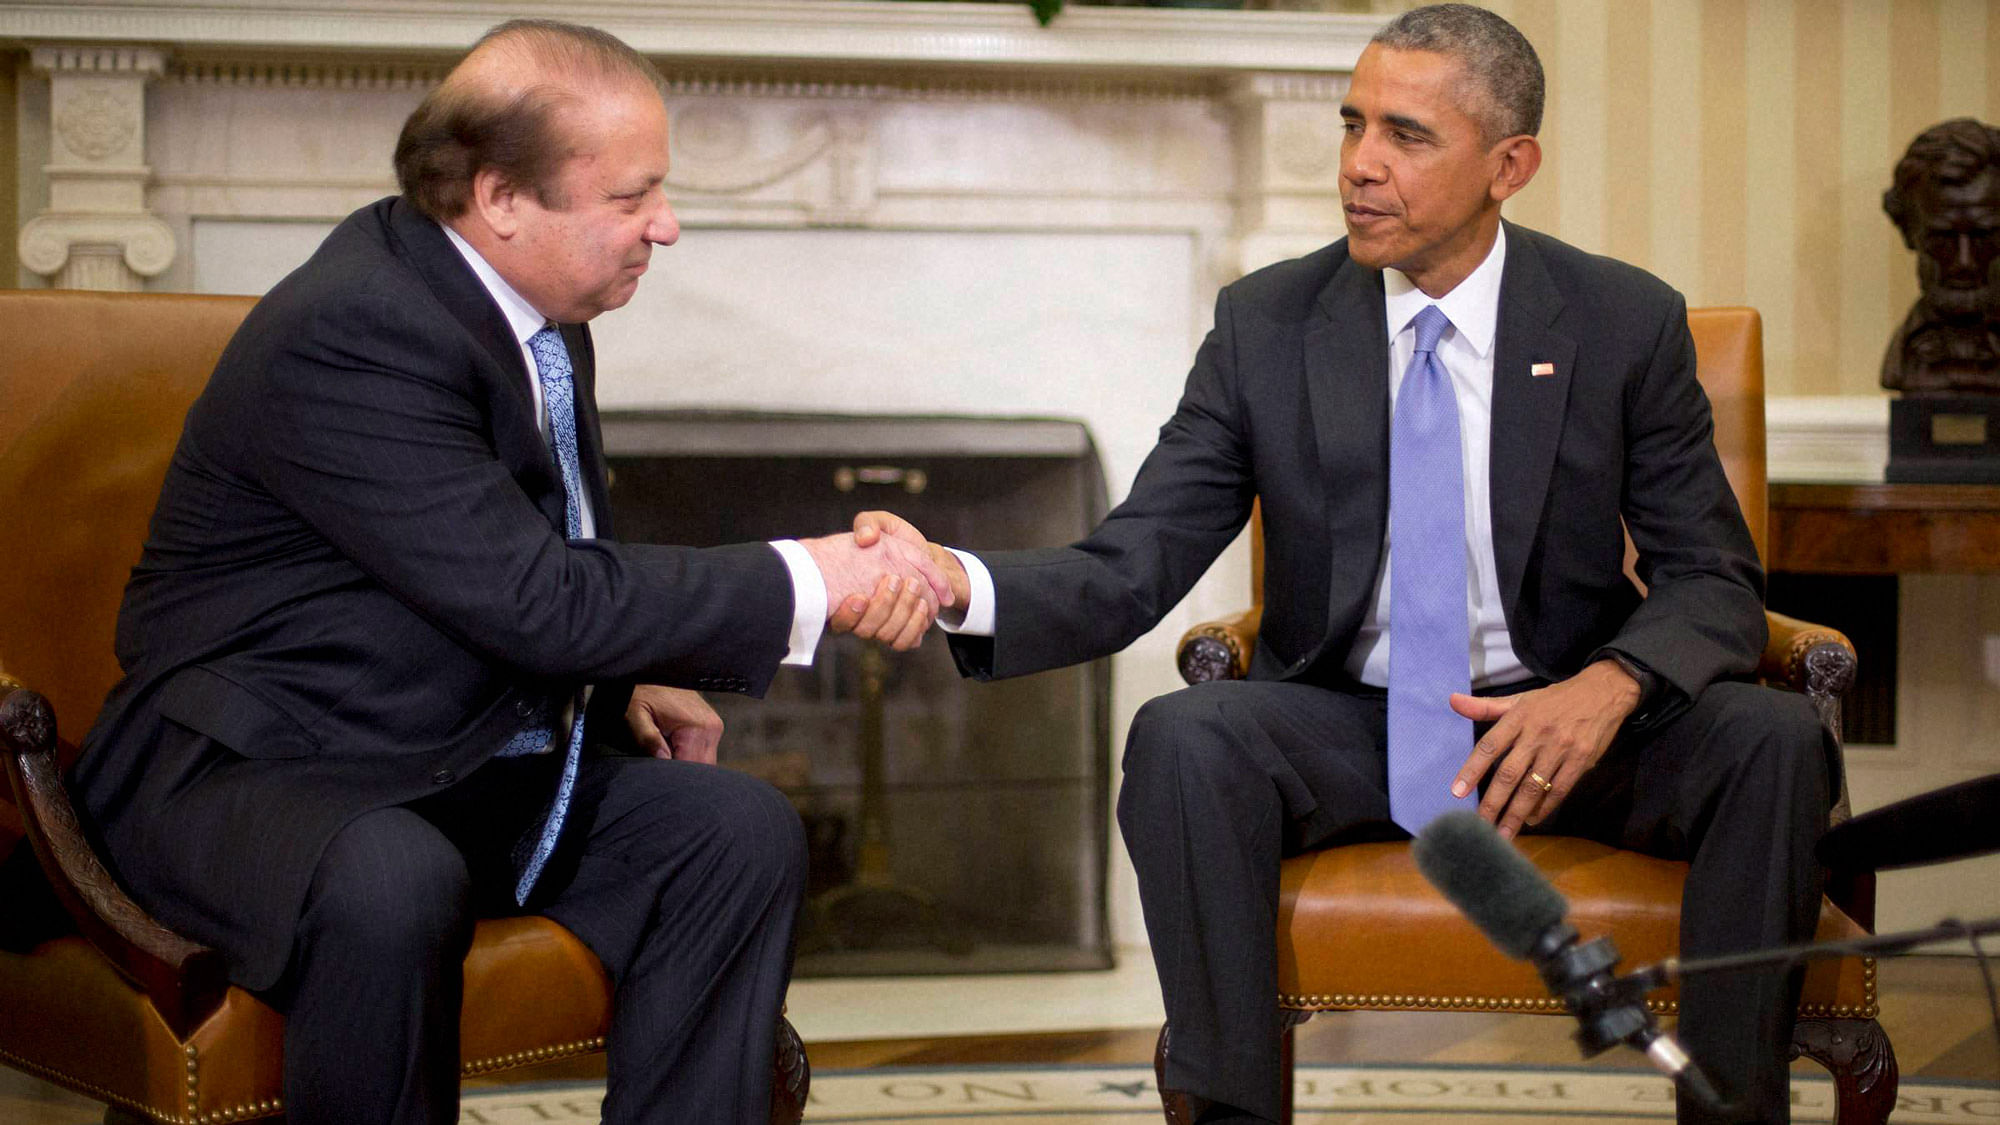 President Barack Obama shakes hands with Pakistani Prime Minister Nawaz Sharif during their meeting in the White House in Washington, October 22, 2015. (Photo: PTI)